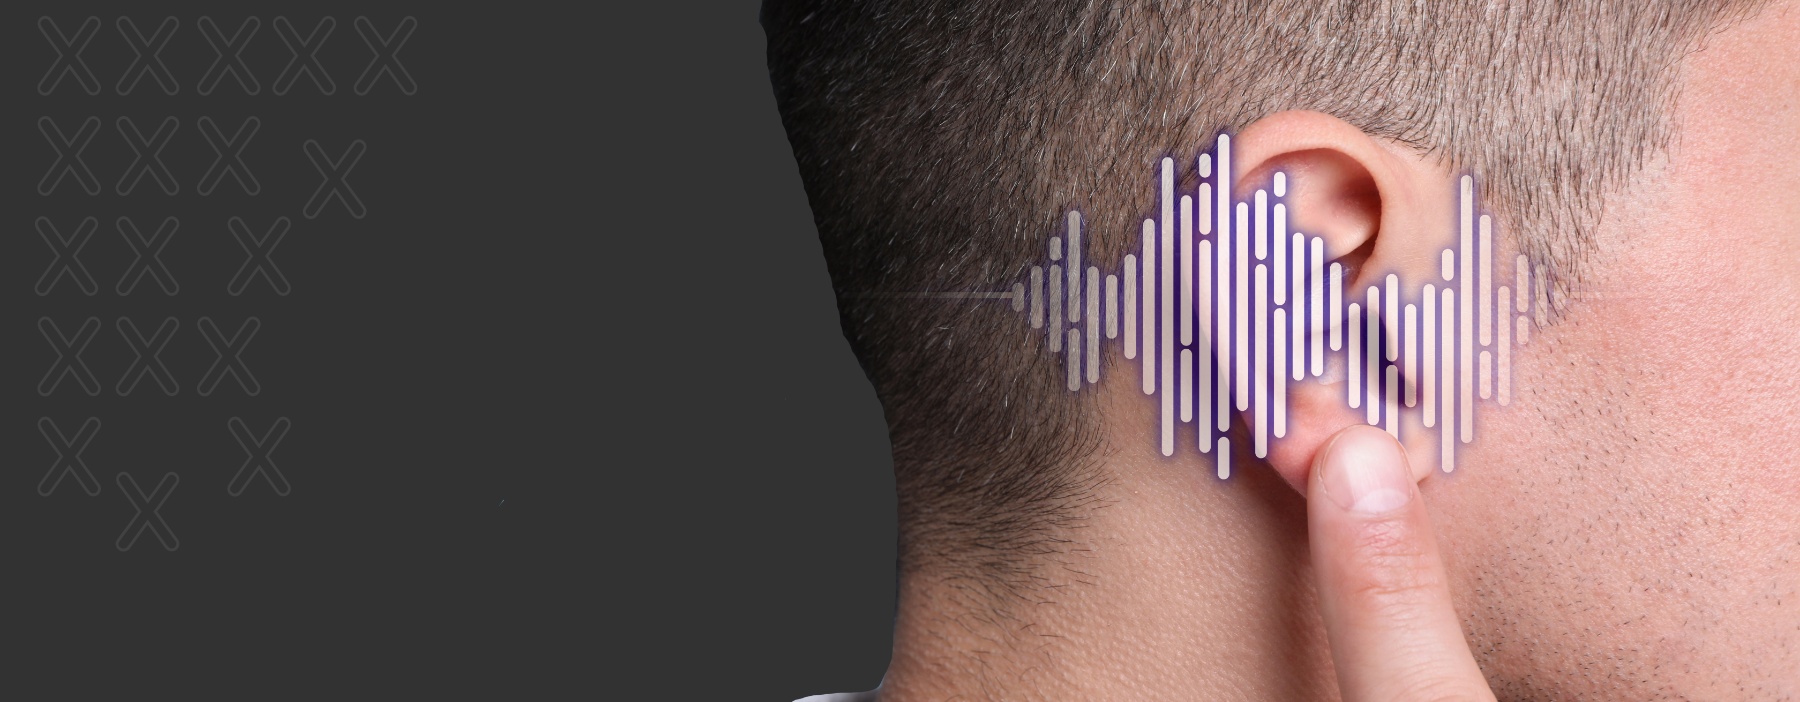 Innovative approaches to hearing loss: Going beyond traditional methods